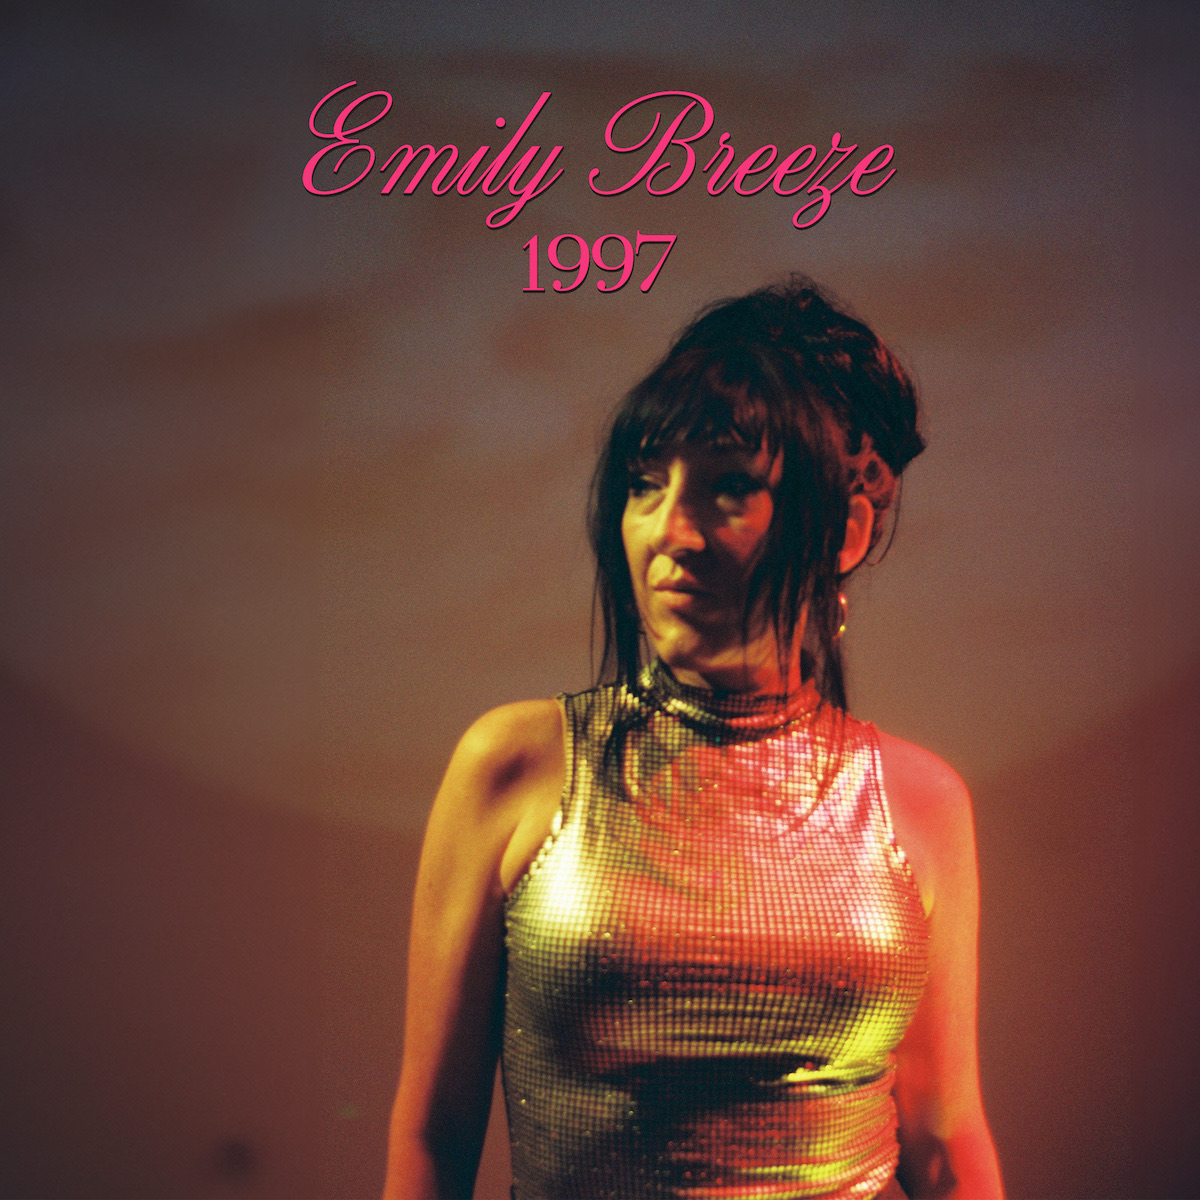 HOT TRACK: “1997” by Emily Breeze